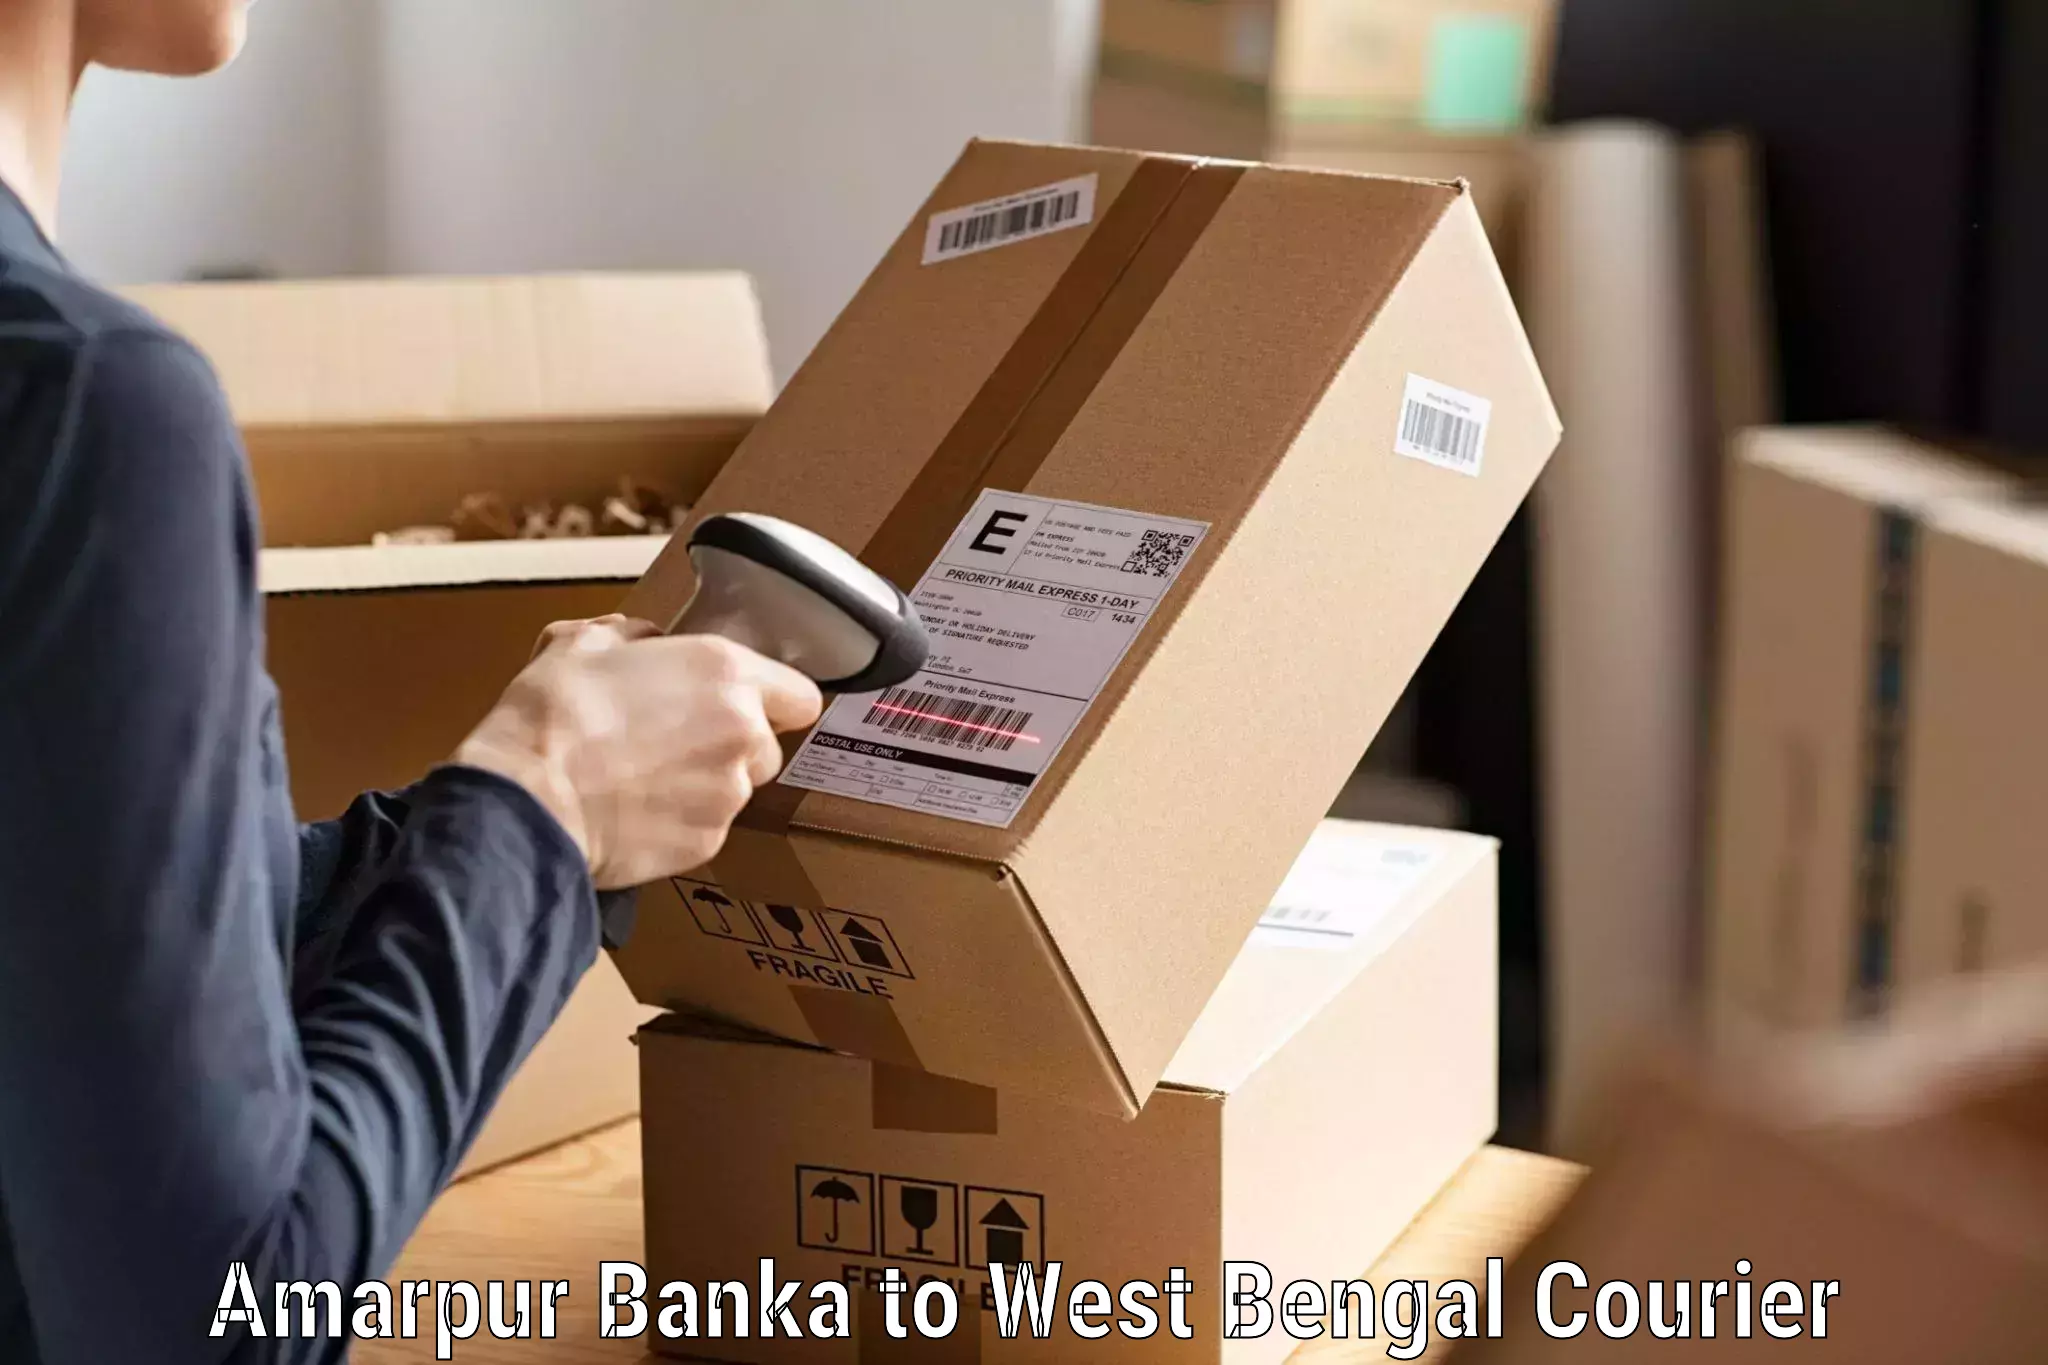 Optimized delivery routes Amarpur Banka to West Bengal